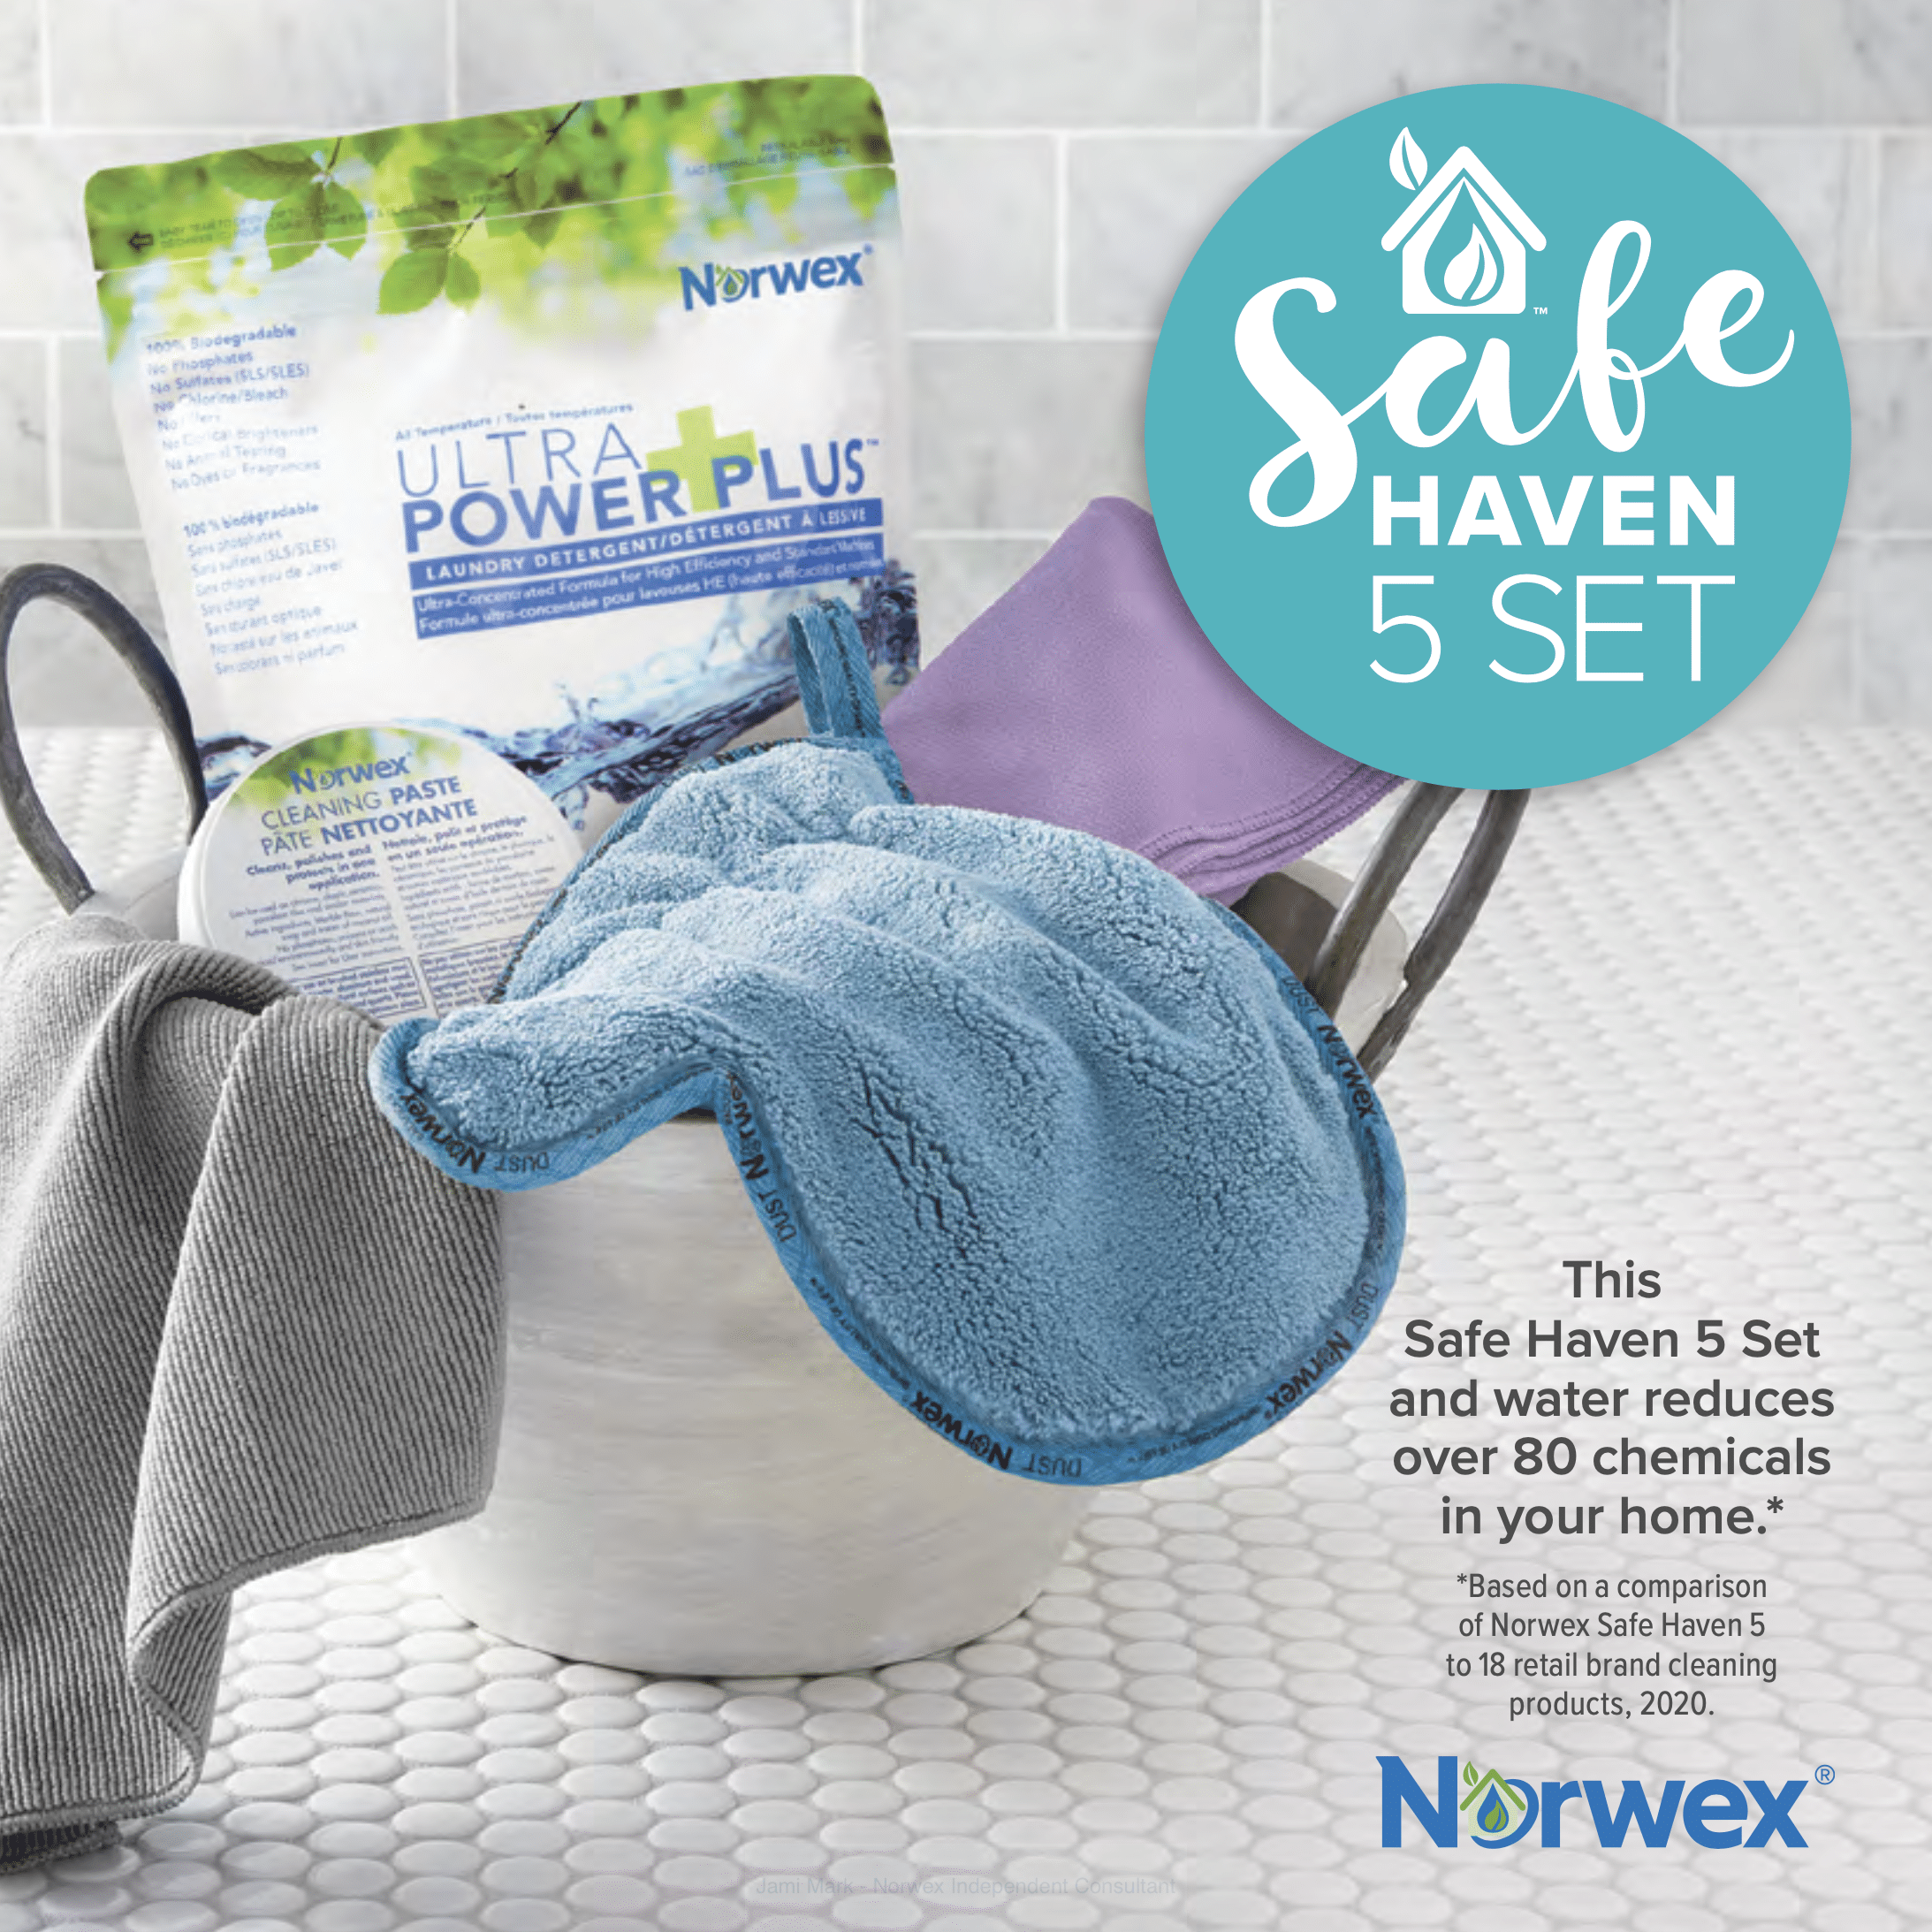 Stainless Steel Cloth  Norwex cleaning, Norwex, Norwex party